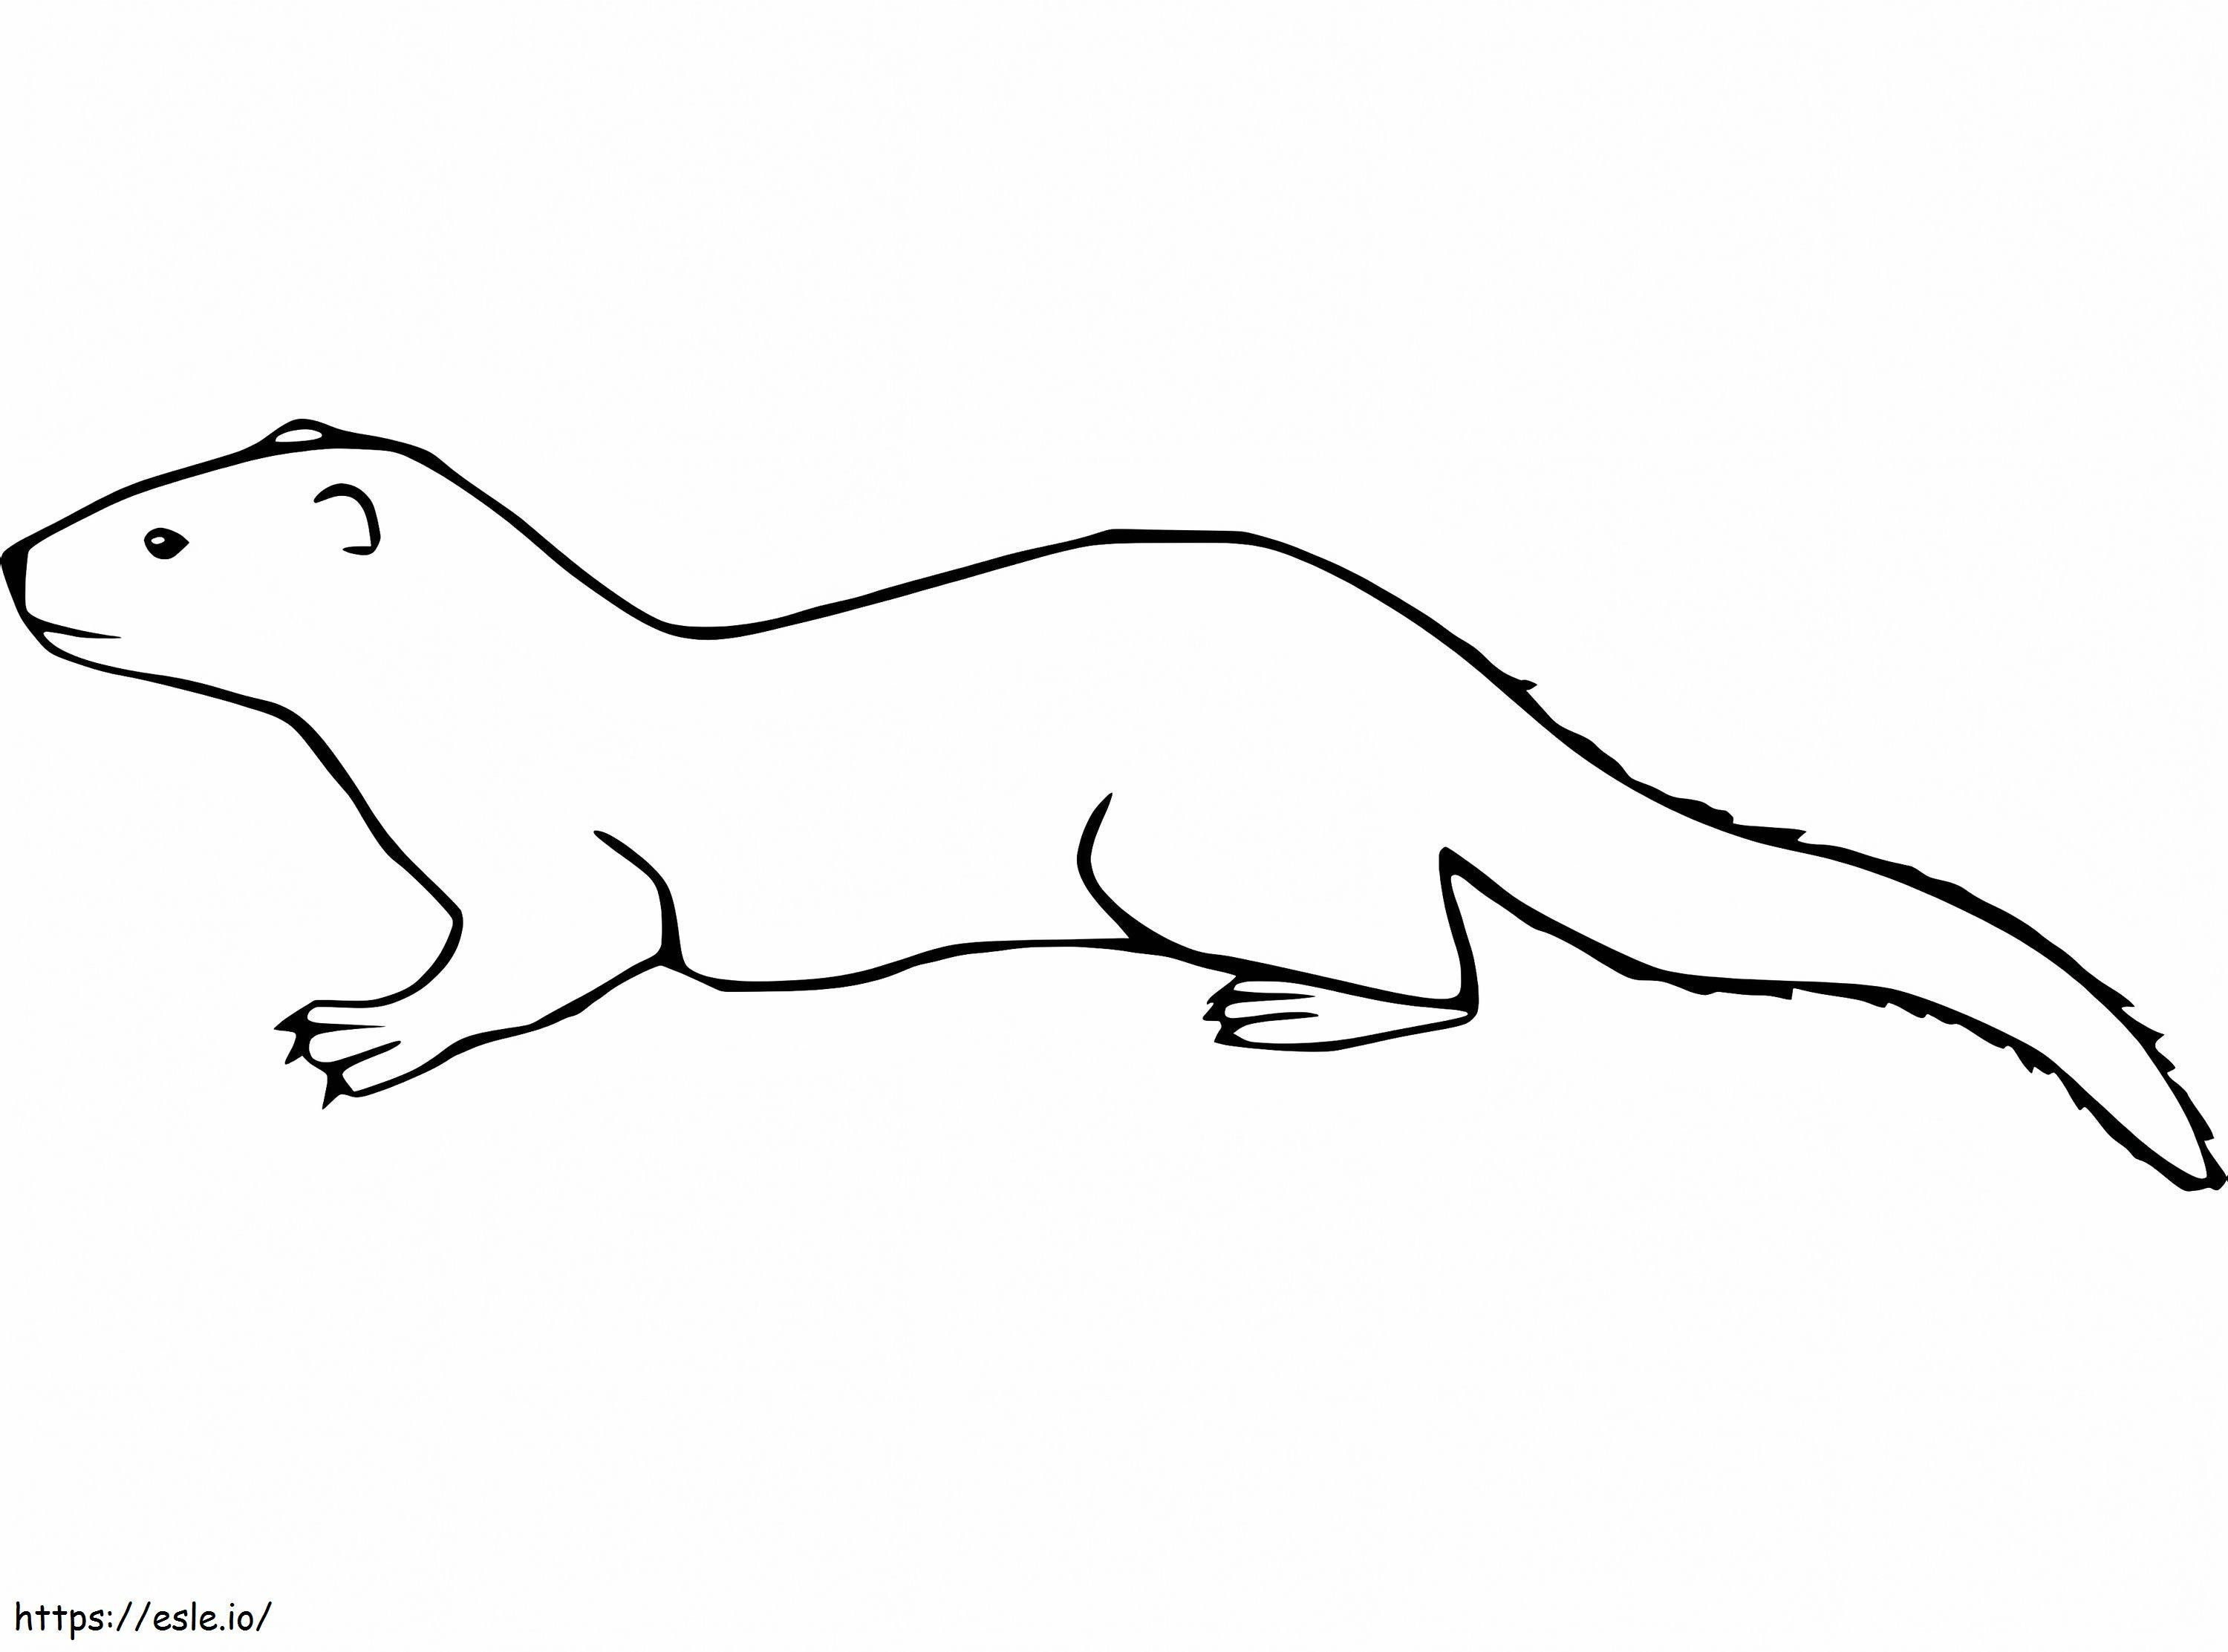 Weasel 5 coloring page